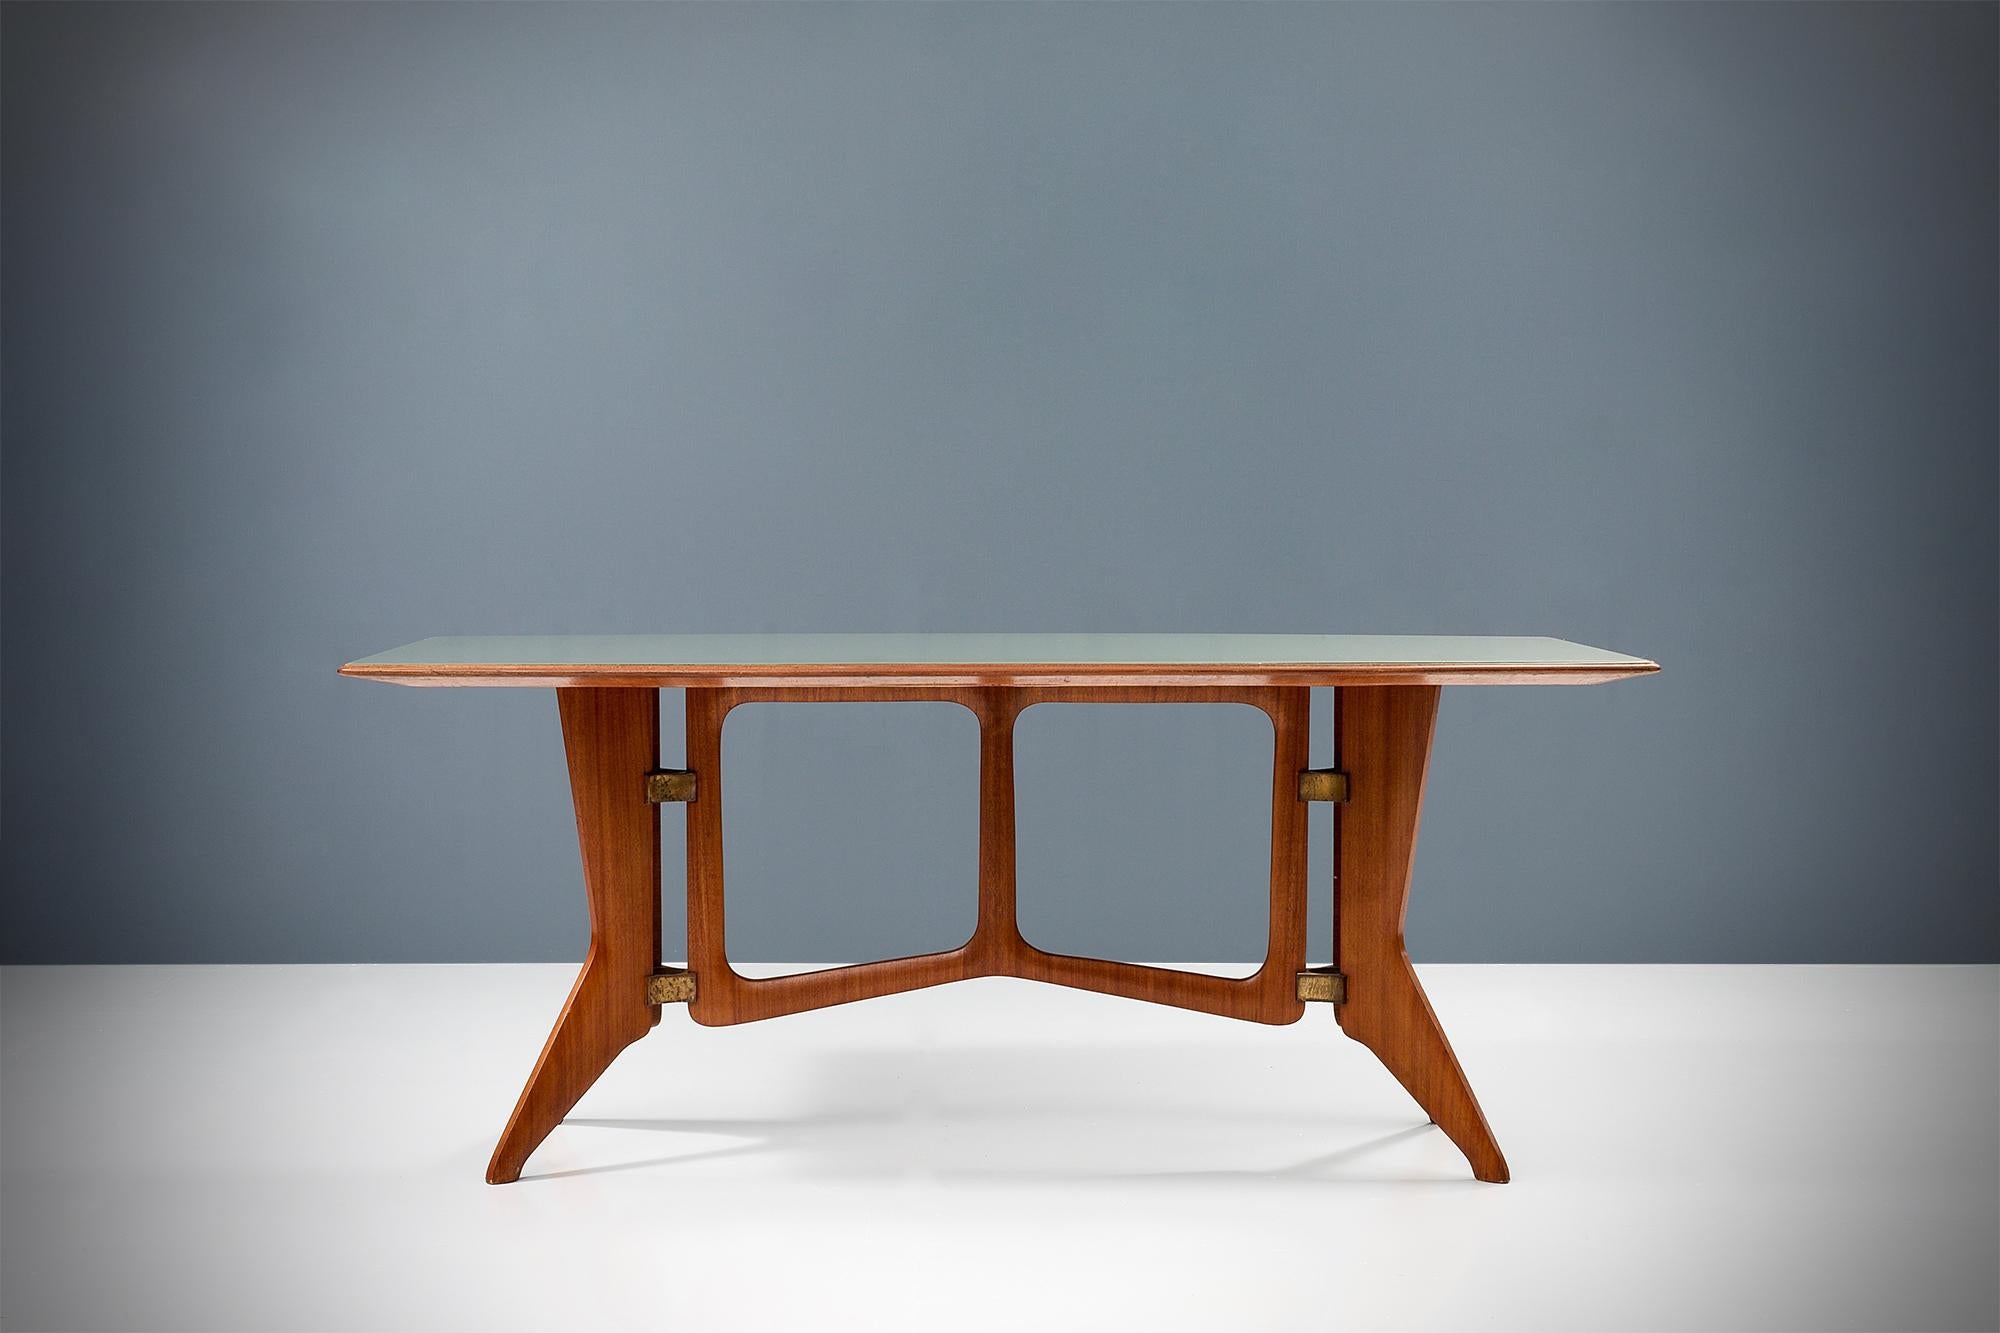 Sculptural Italian dining table by Ariberto Colombo with a teak frame that has aged beautifully over time. The frame is held together by curved triangular brass joints making the table quite sturdy but elegant at the same time. The shapes of this